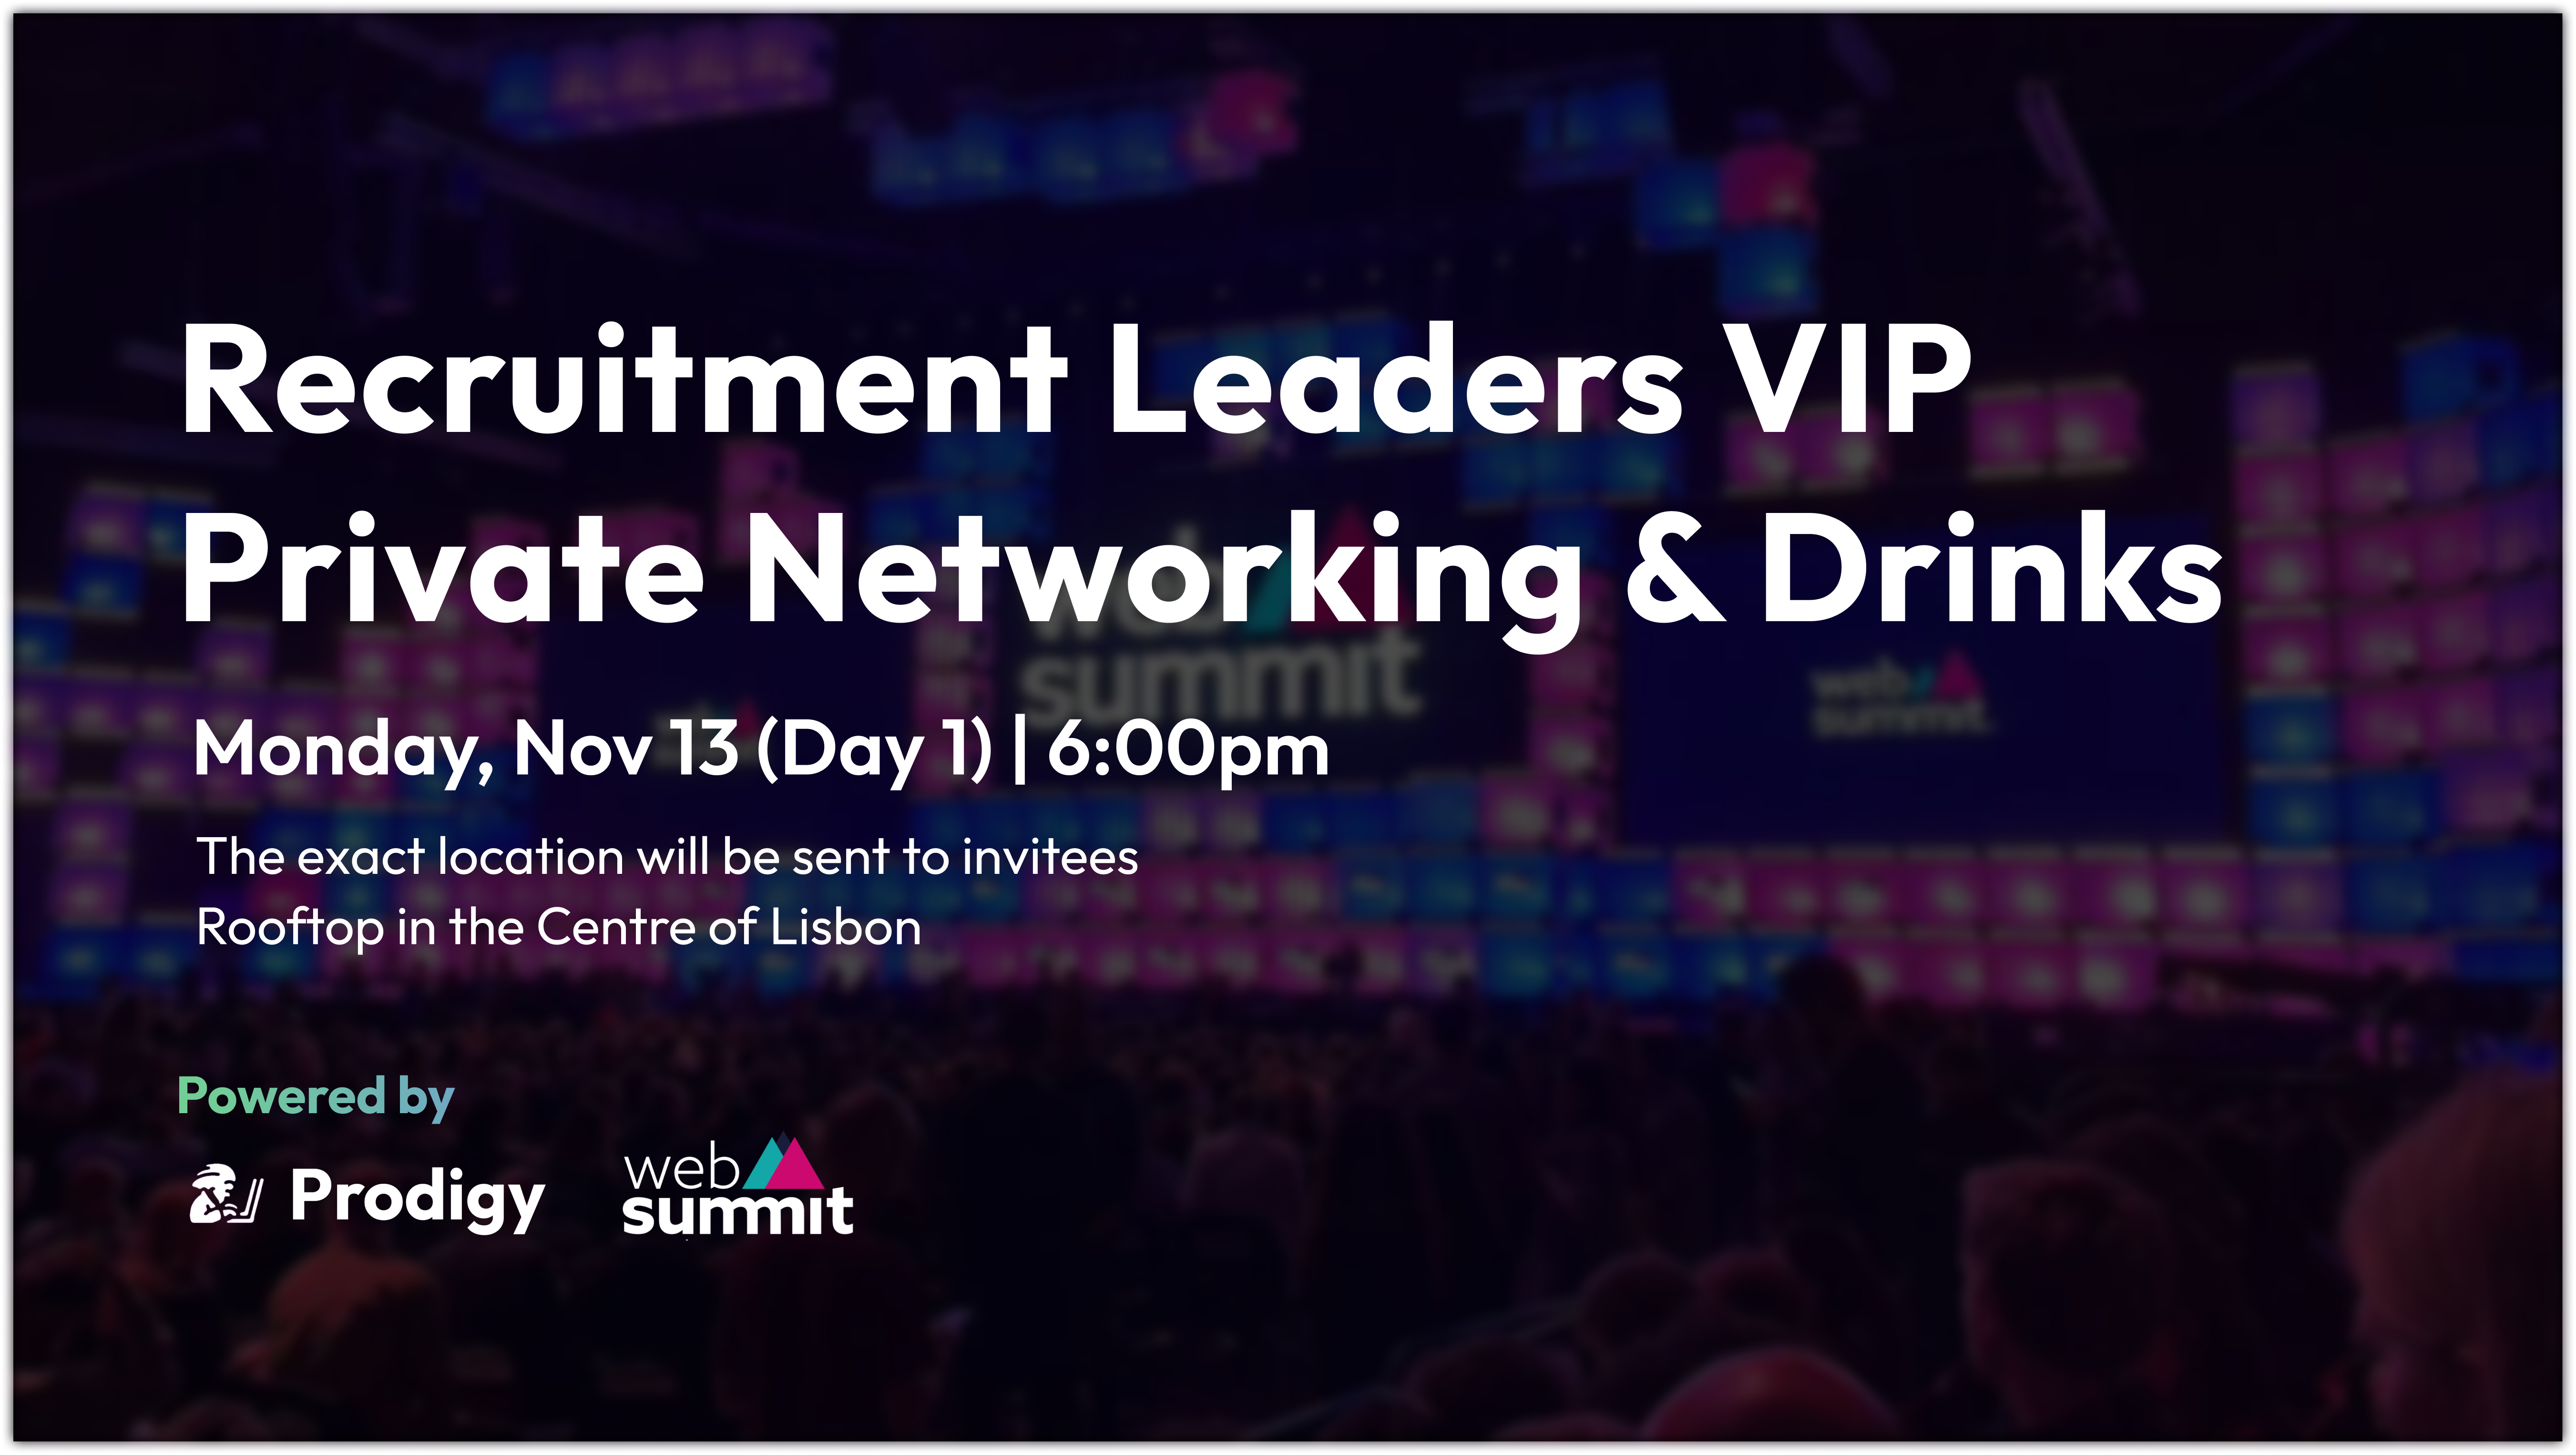 Web Summit – Recruitment Leaders VIP Private Networking & Drinks